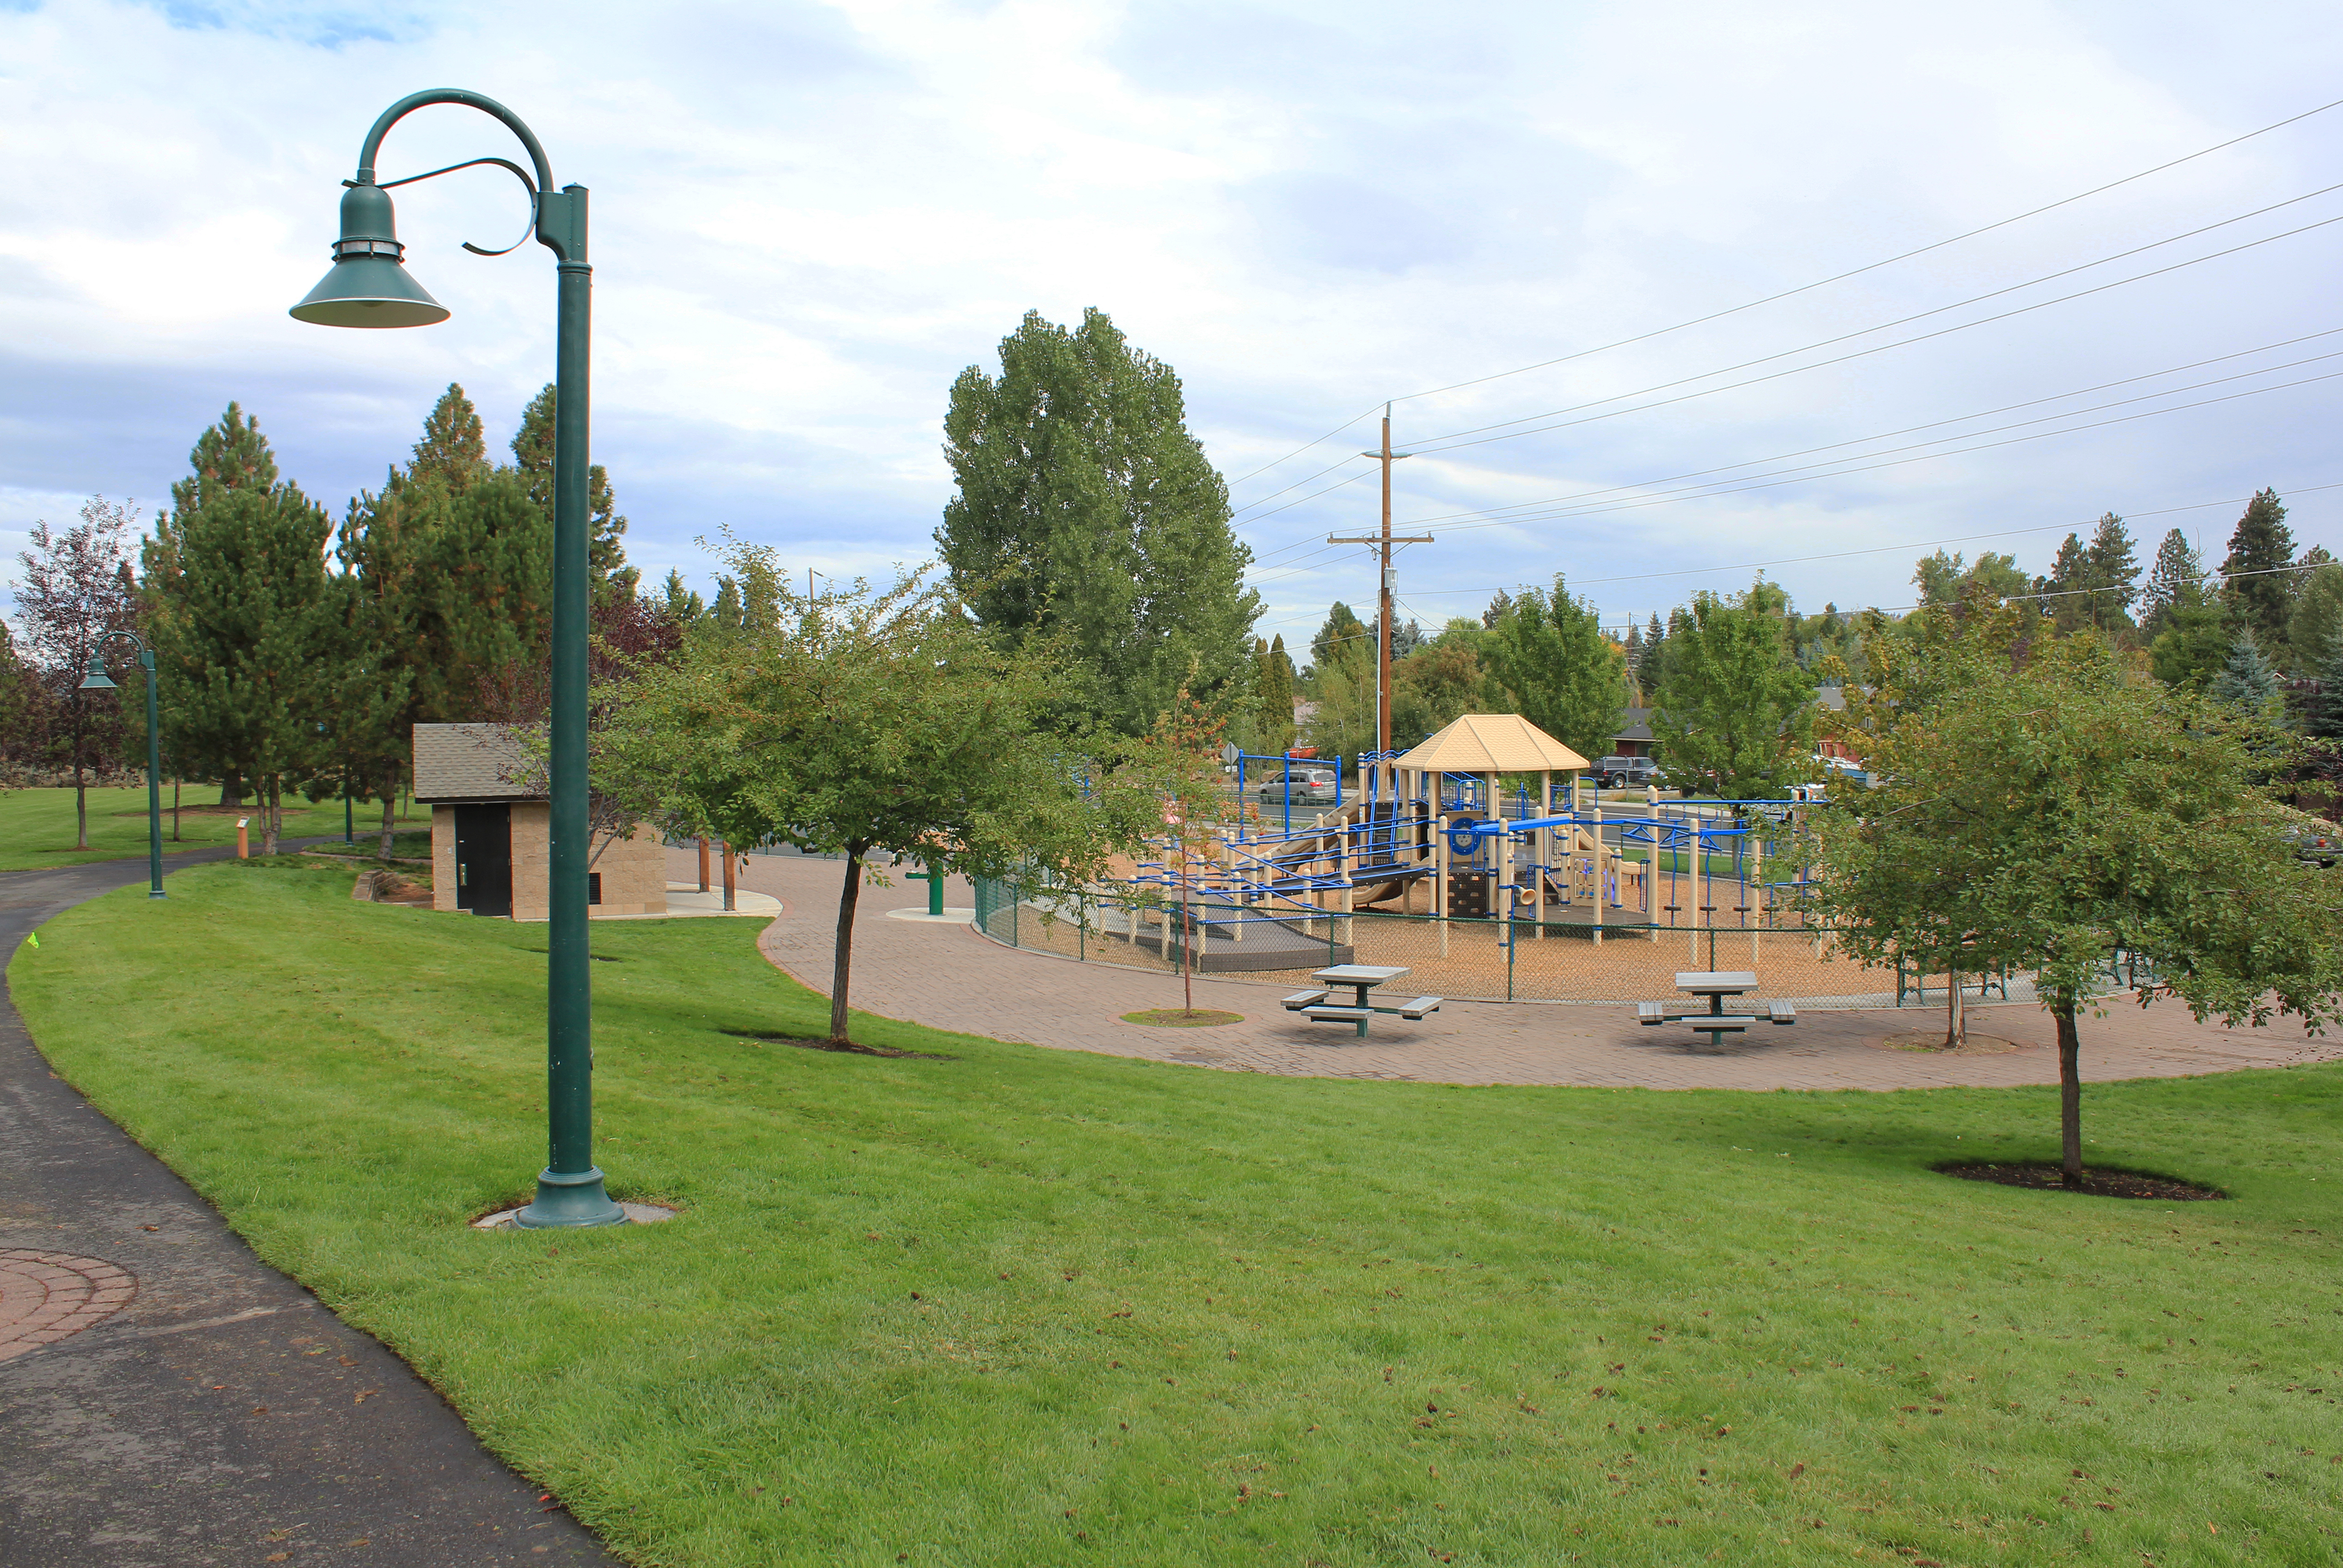 Parks Near Me With Playground And Basketball Court - MenalMeida